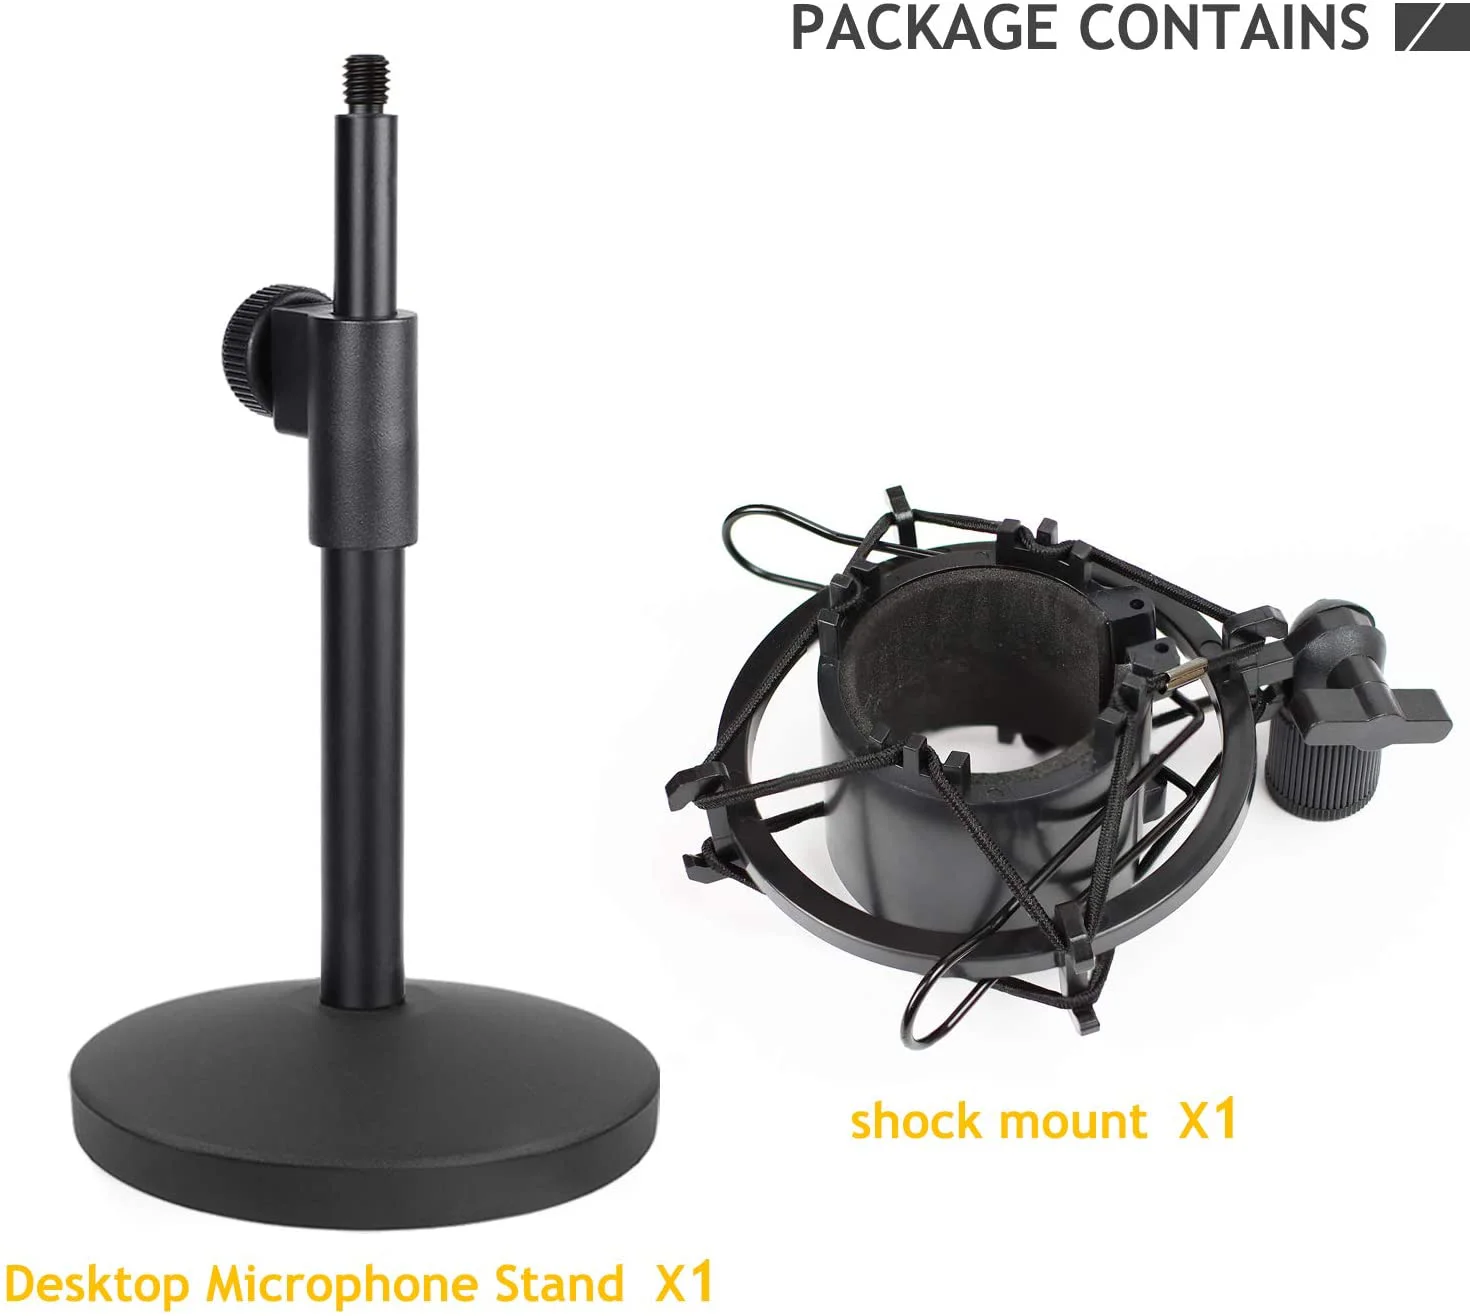 Desk Mic Stand  Adjustable Metal Table Microphone Stand with Shock Mount for K669 AT2020 Bm 800 Microphone images - 6